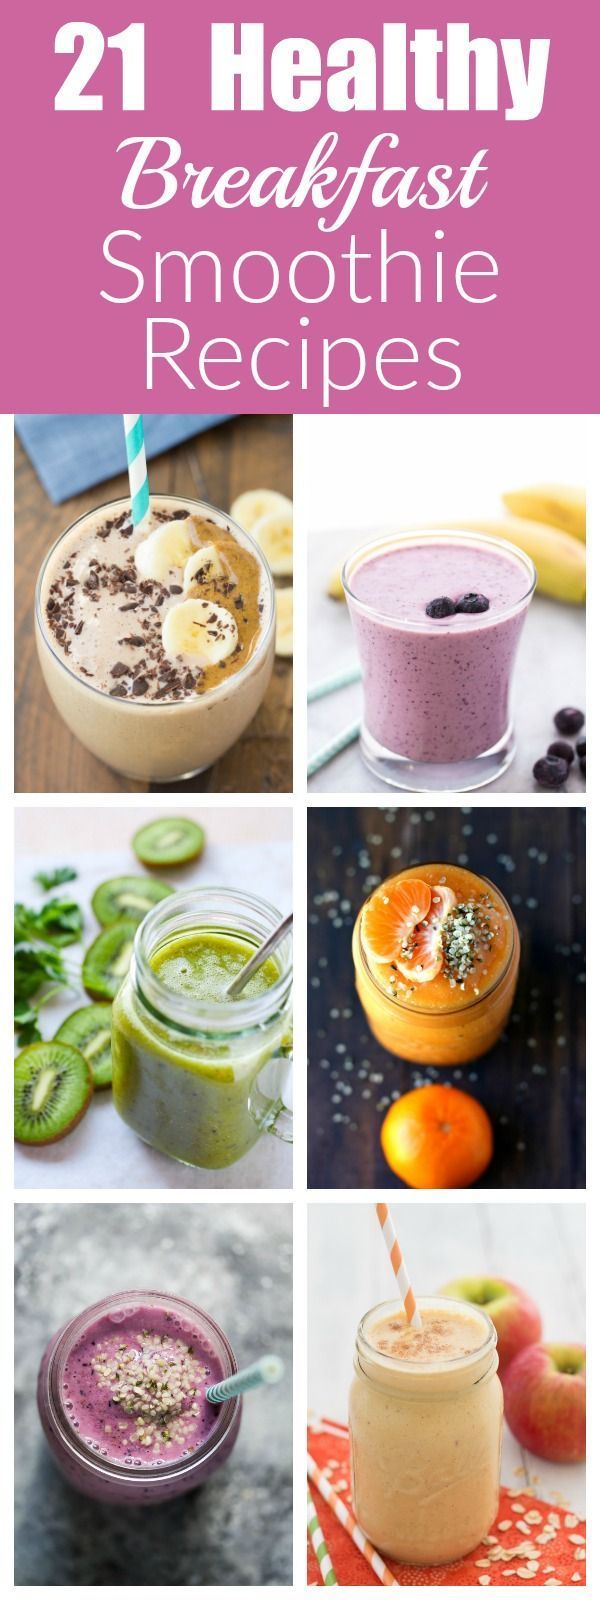 21 HEALTHY Breakfast Smoothie recipes for busy mornings…